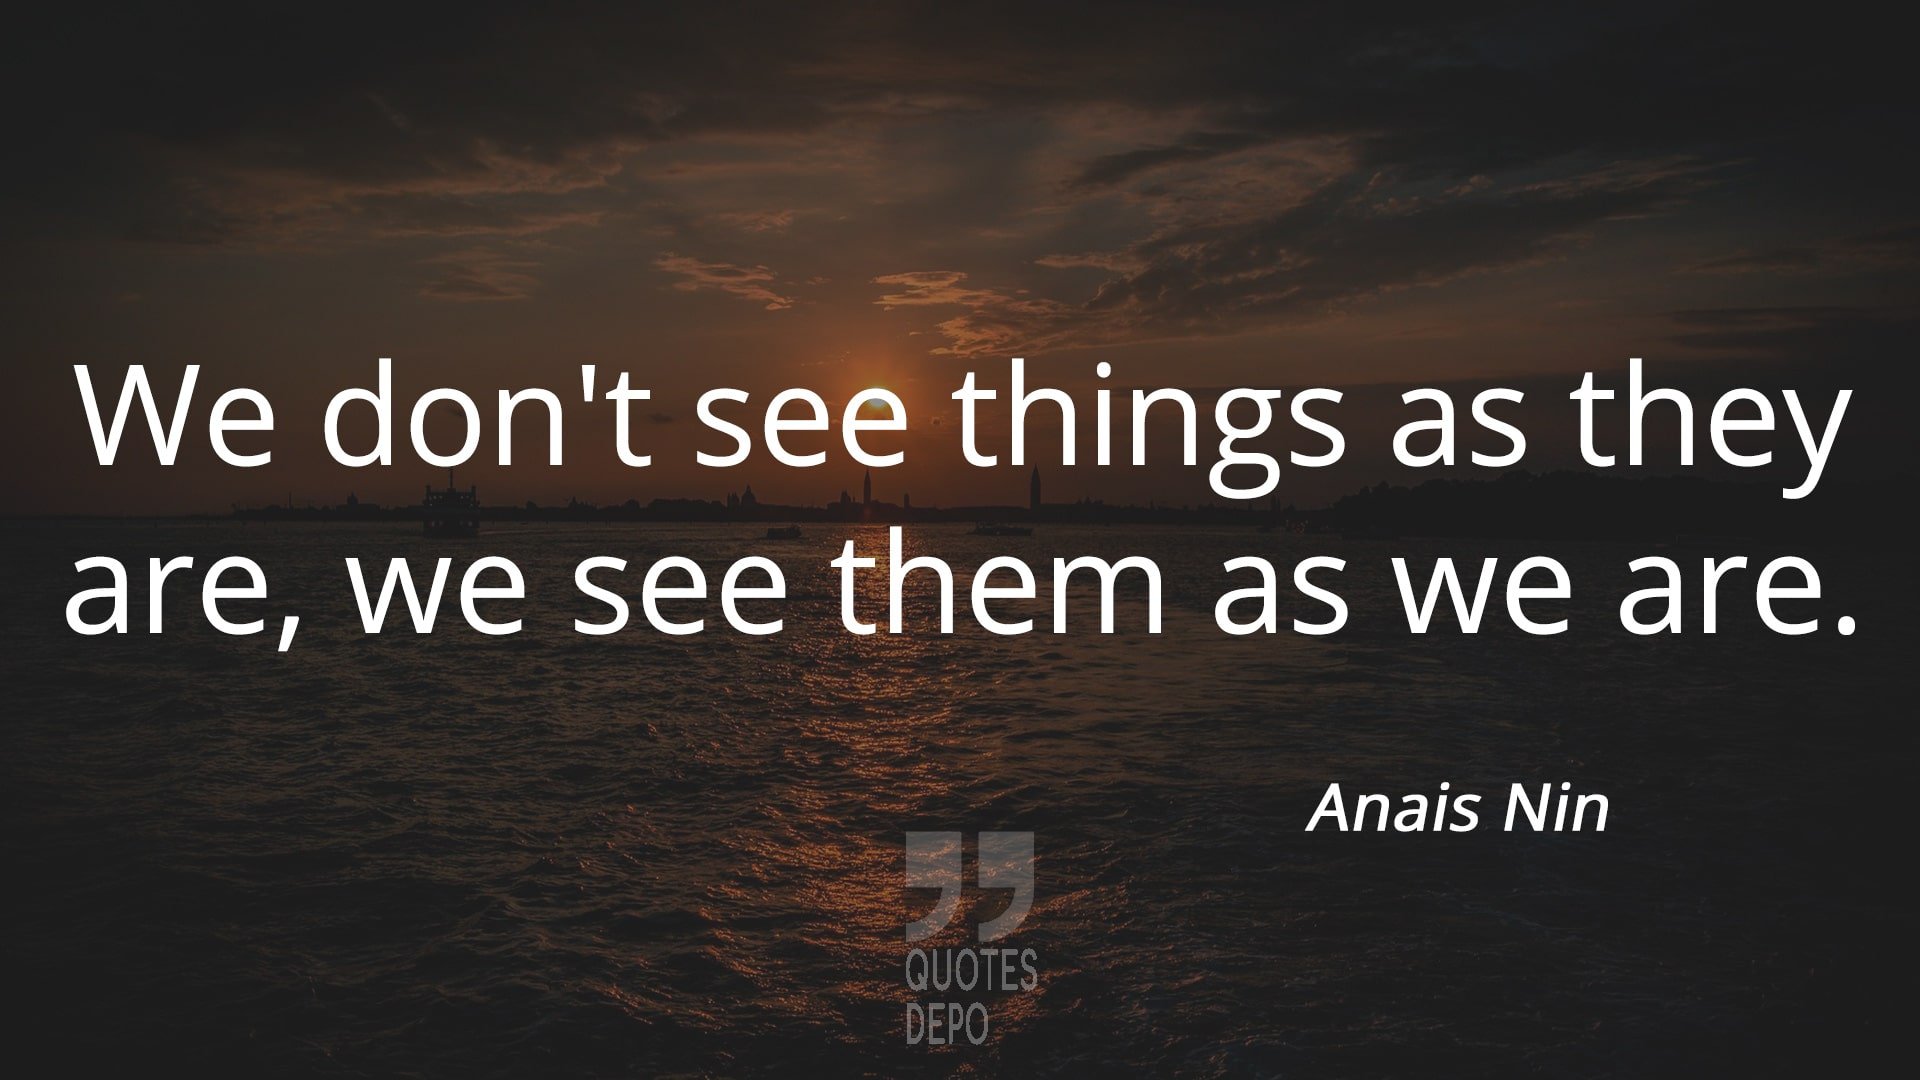 we don't see things as they are - anais nin quotes